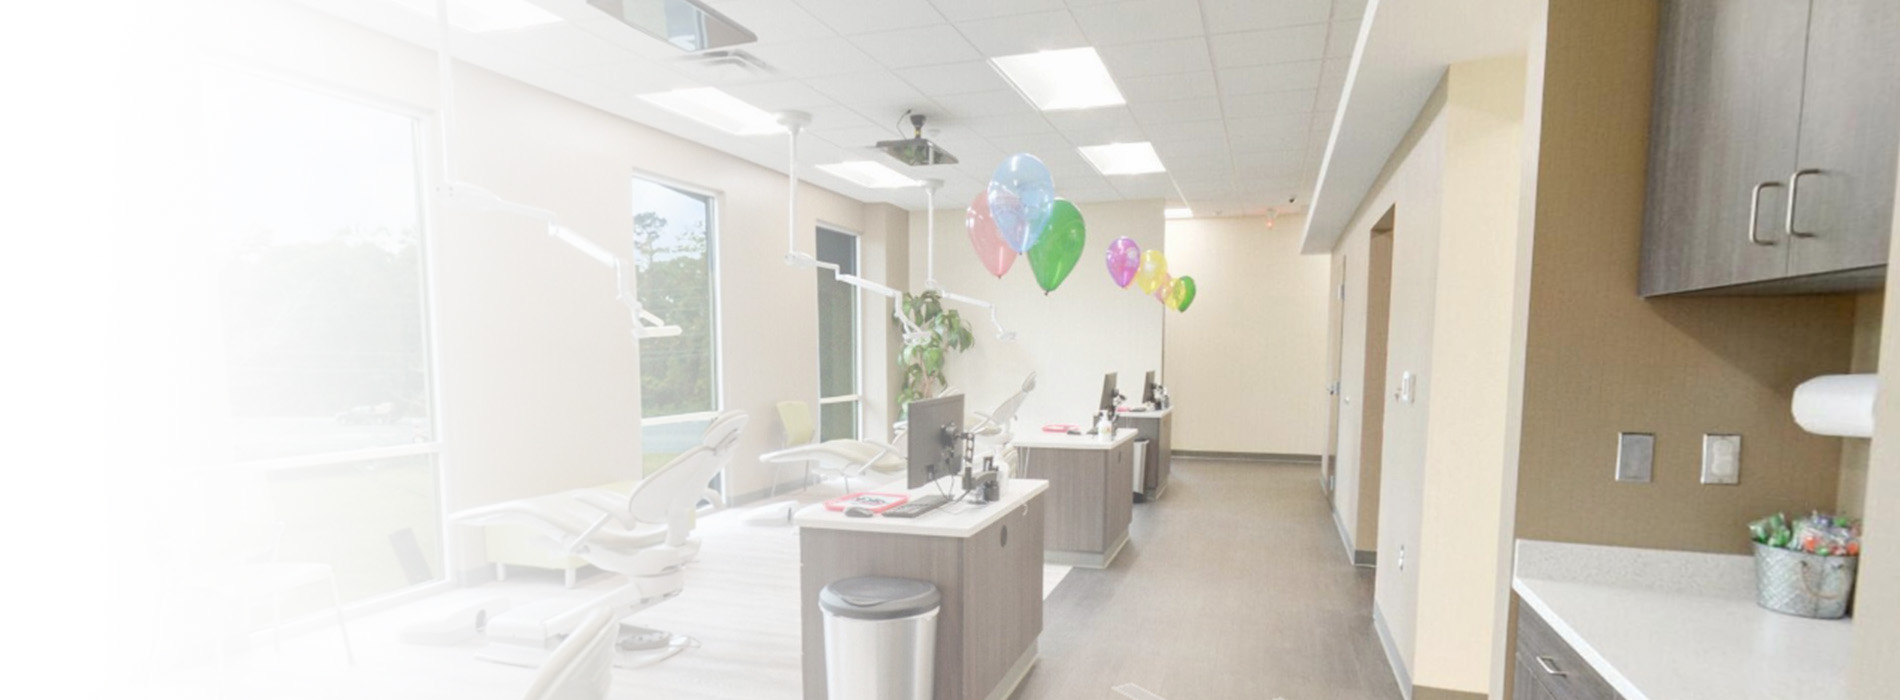 The image depicts an interior space that appears to be a modern office or reception area, with a clean and well-lit environment featuring a desk, chairs, a receptionist area, and a decorative balloon.